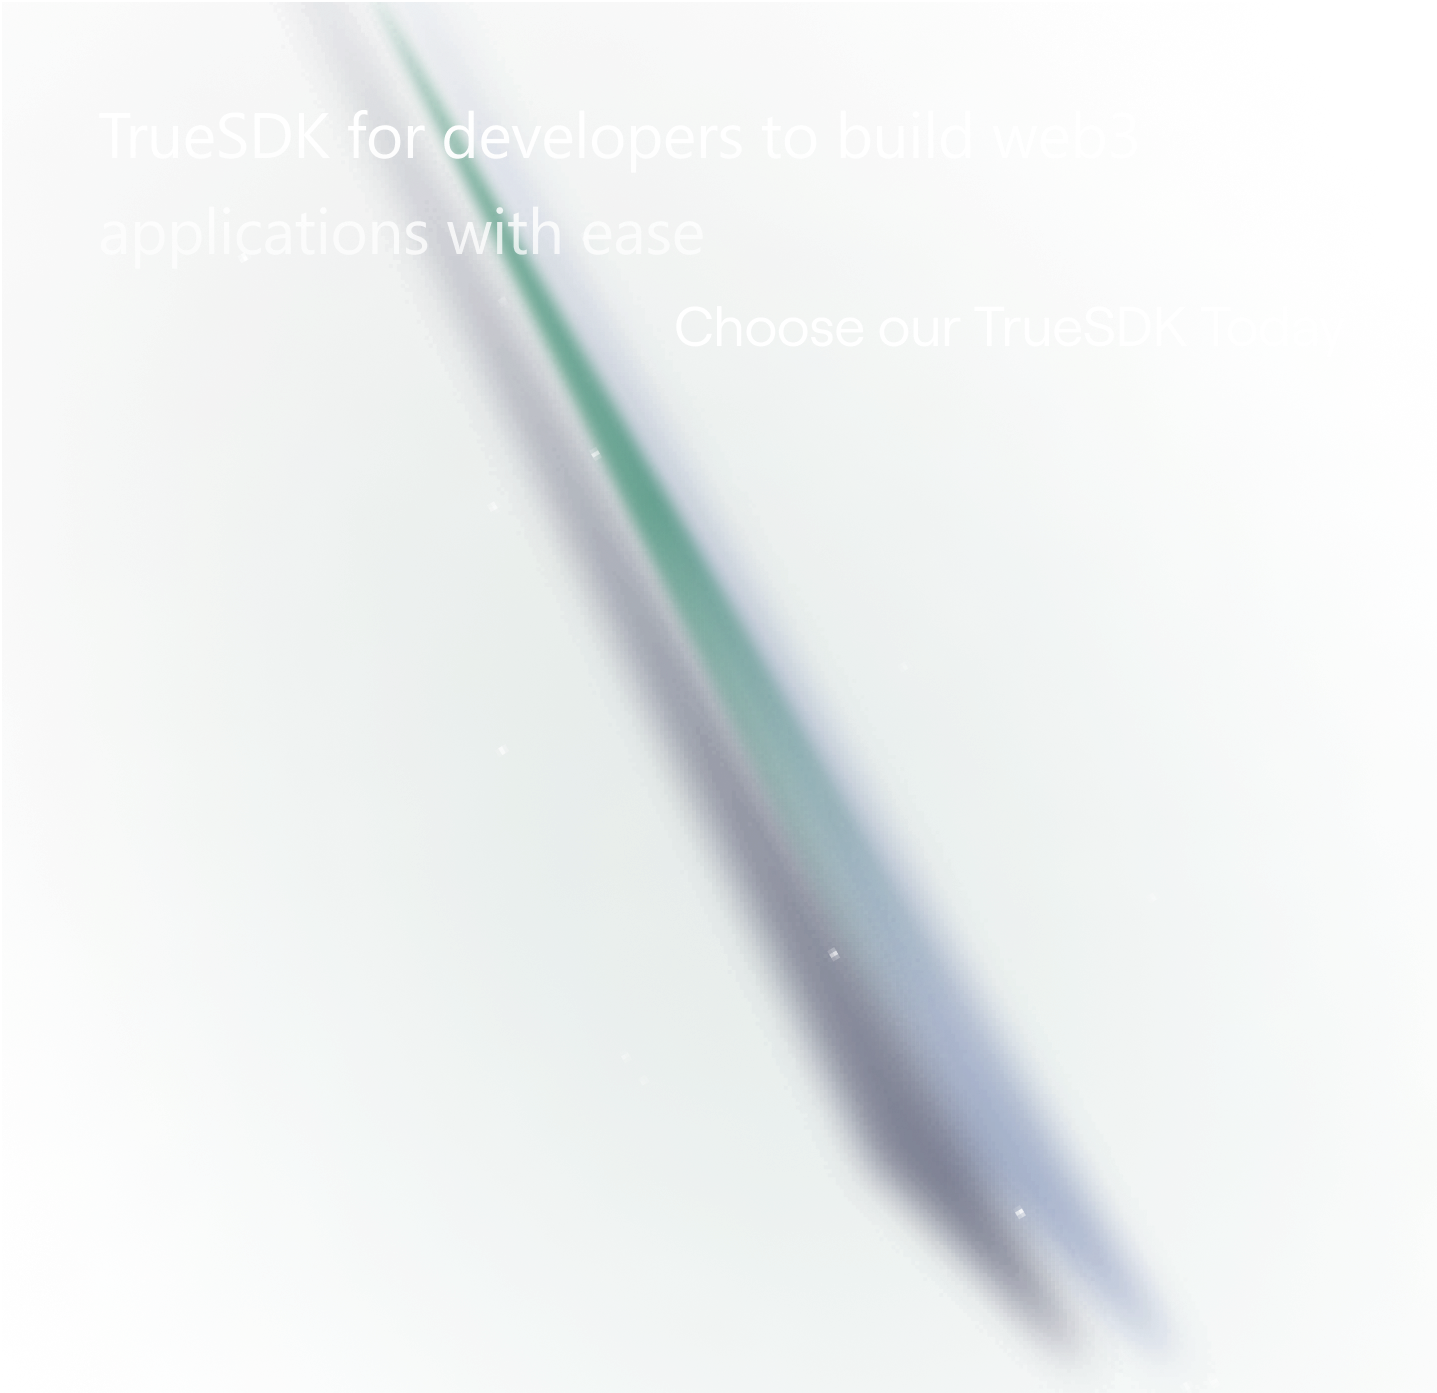 TrueSDK for developers to build web3 applications with ease